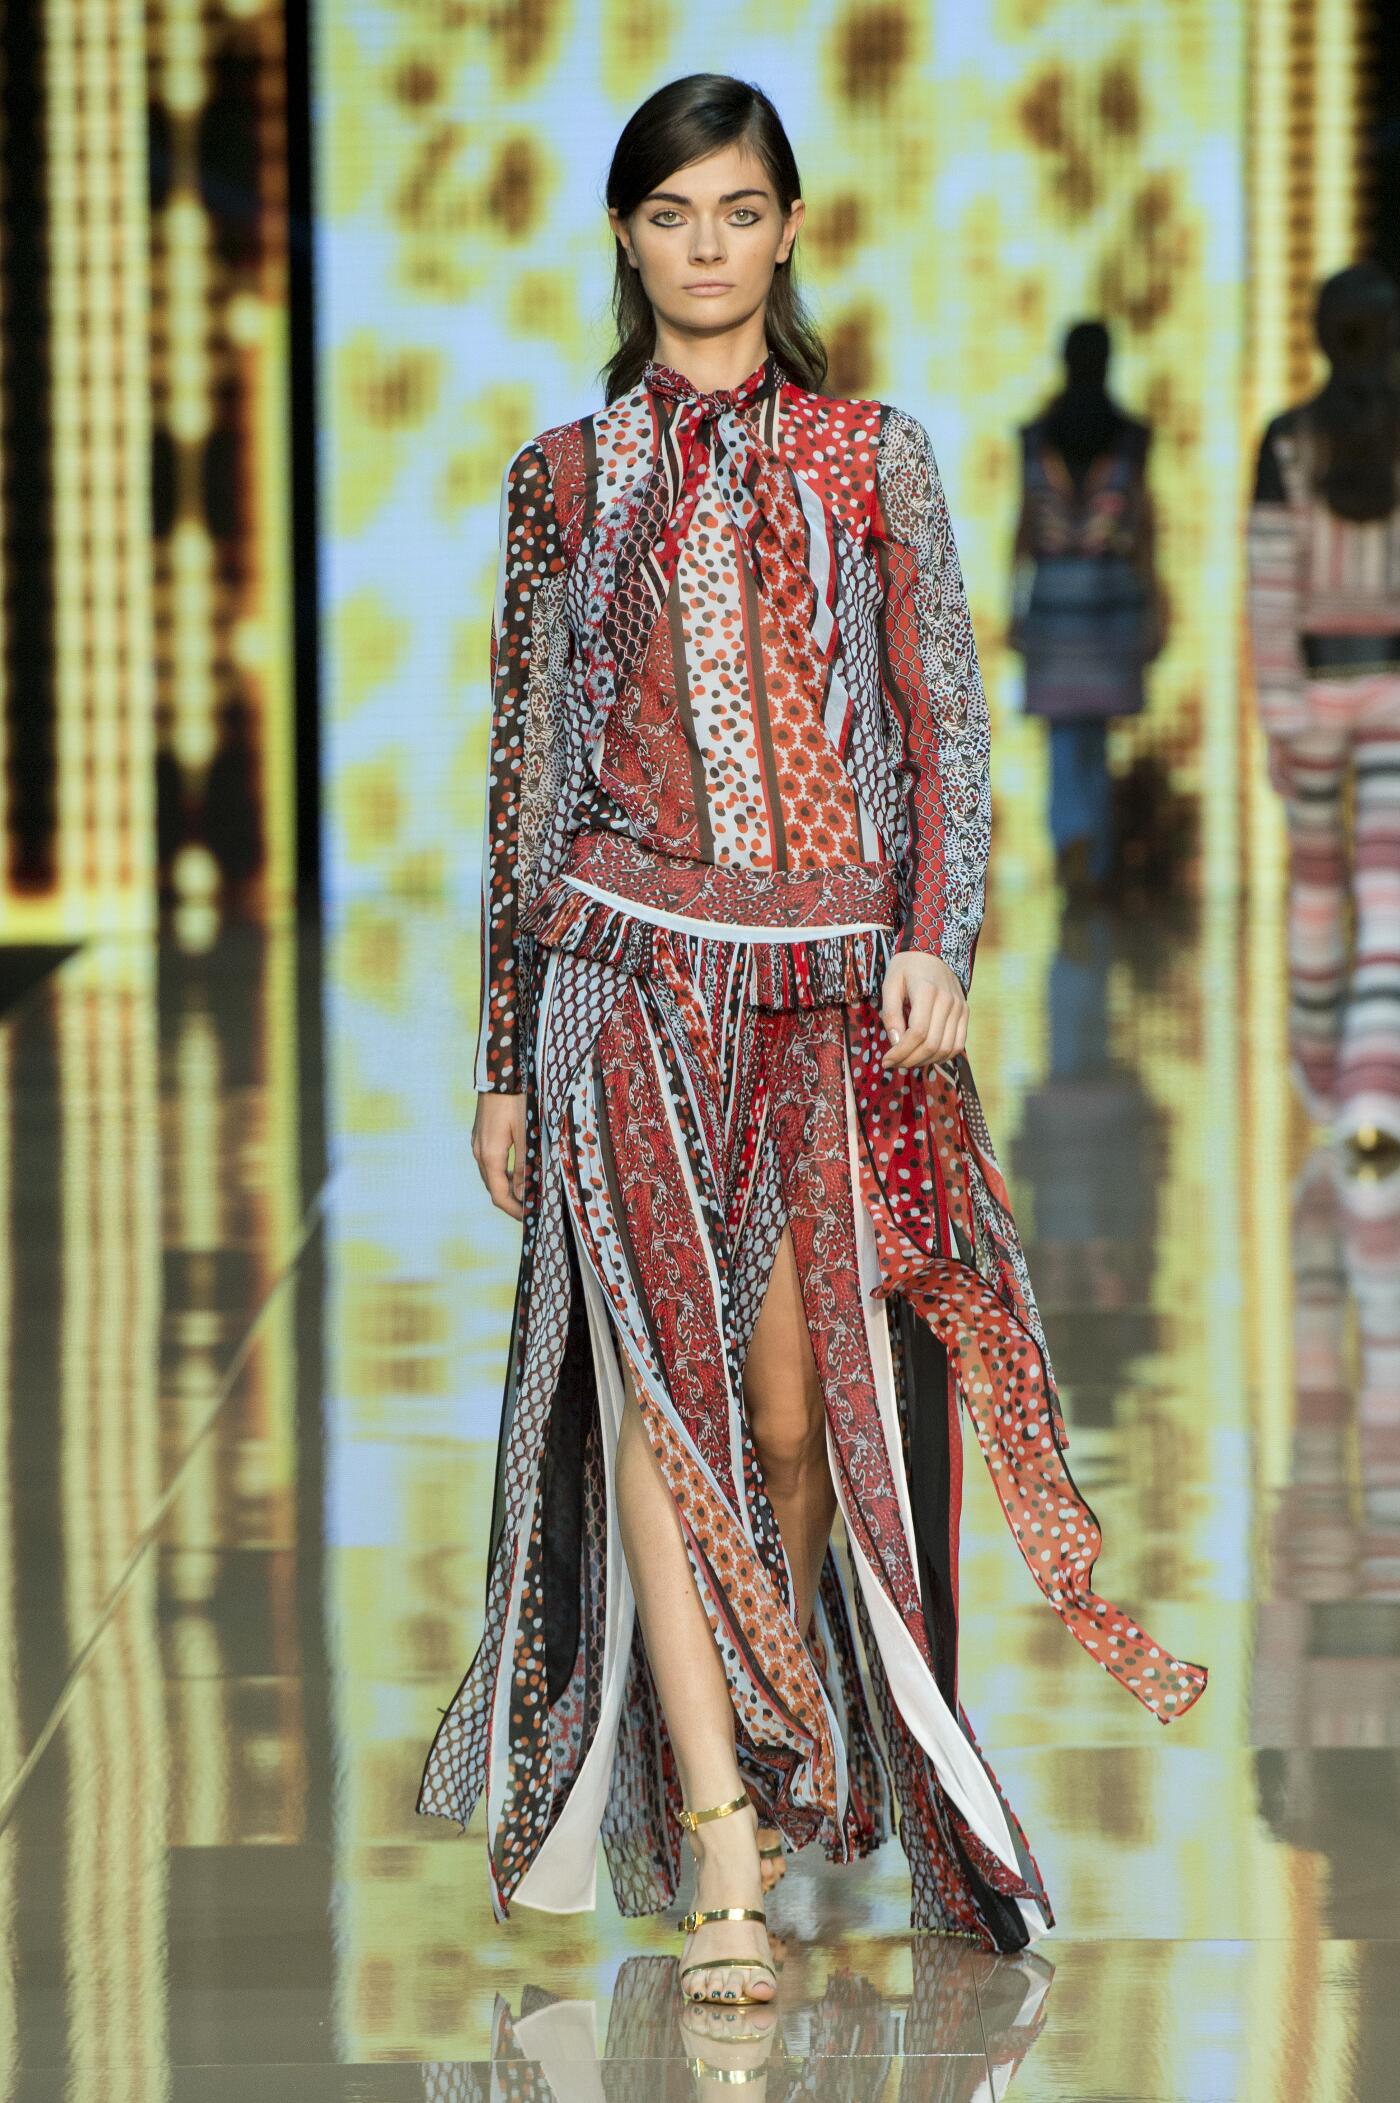 JUST CAVALLI SPRING SUMMER 2015 WOMEN’S COLLECTION | The Skinny Beep